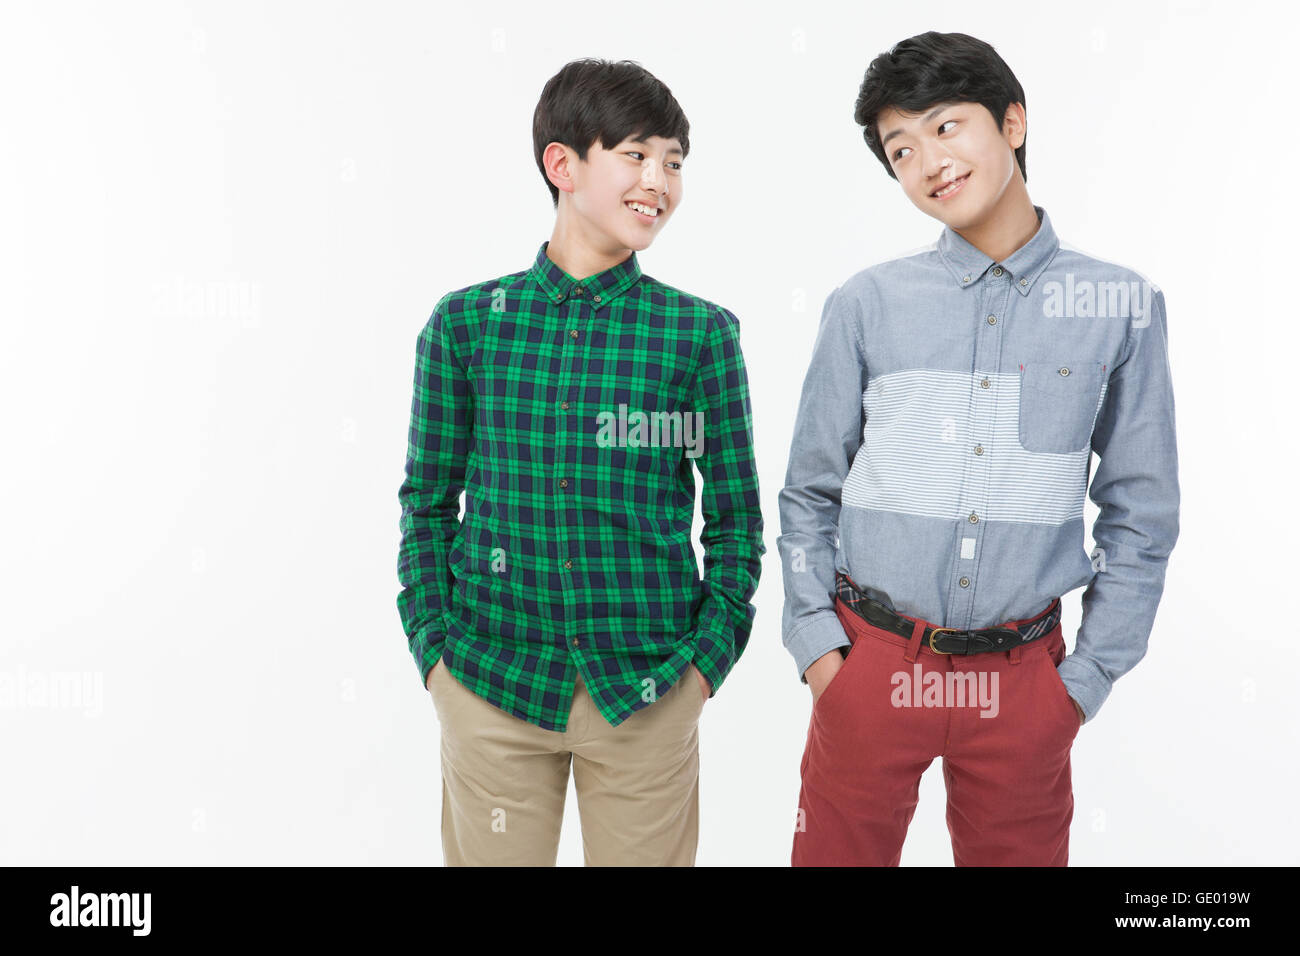 Two smiling school boys in casual clothes Stock Photo